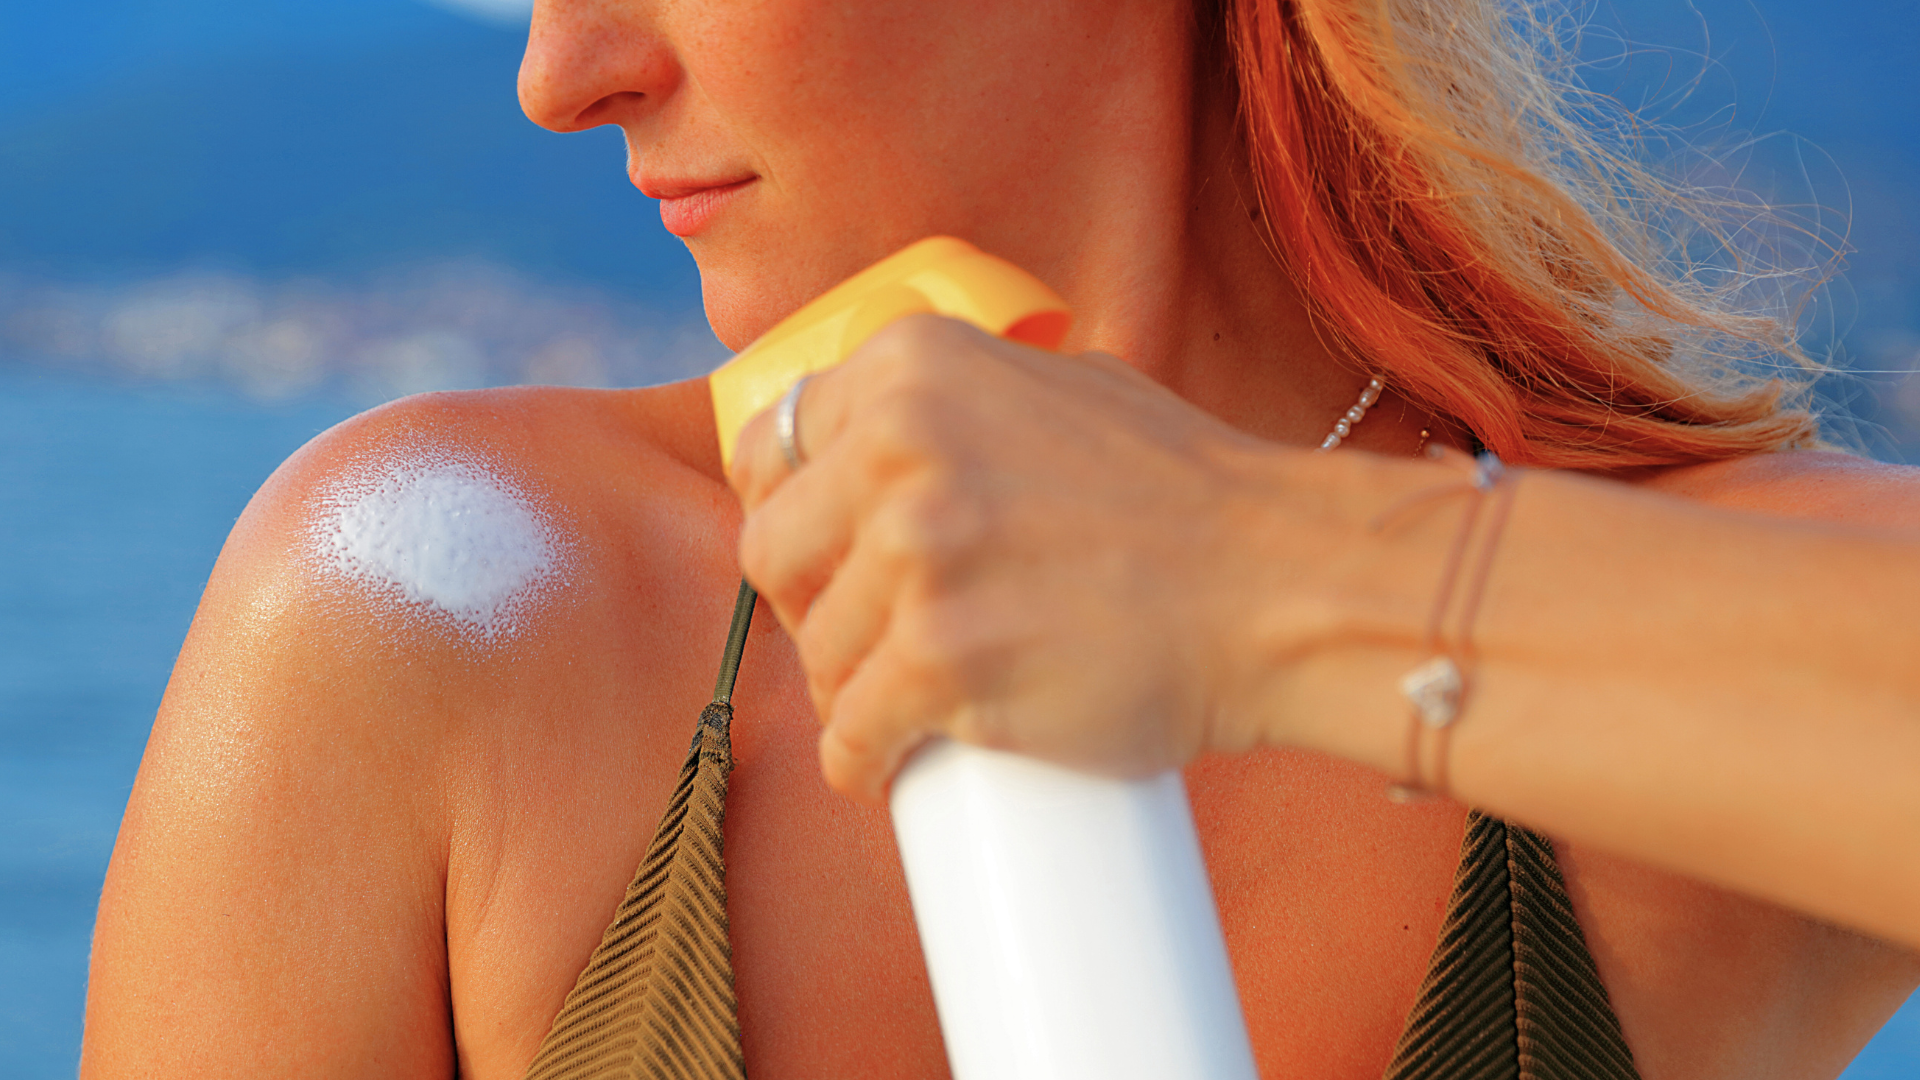 Redheads: Are We Applying Sunscreen Wrong?